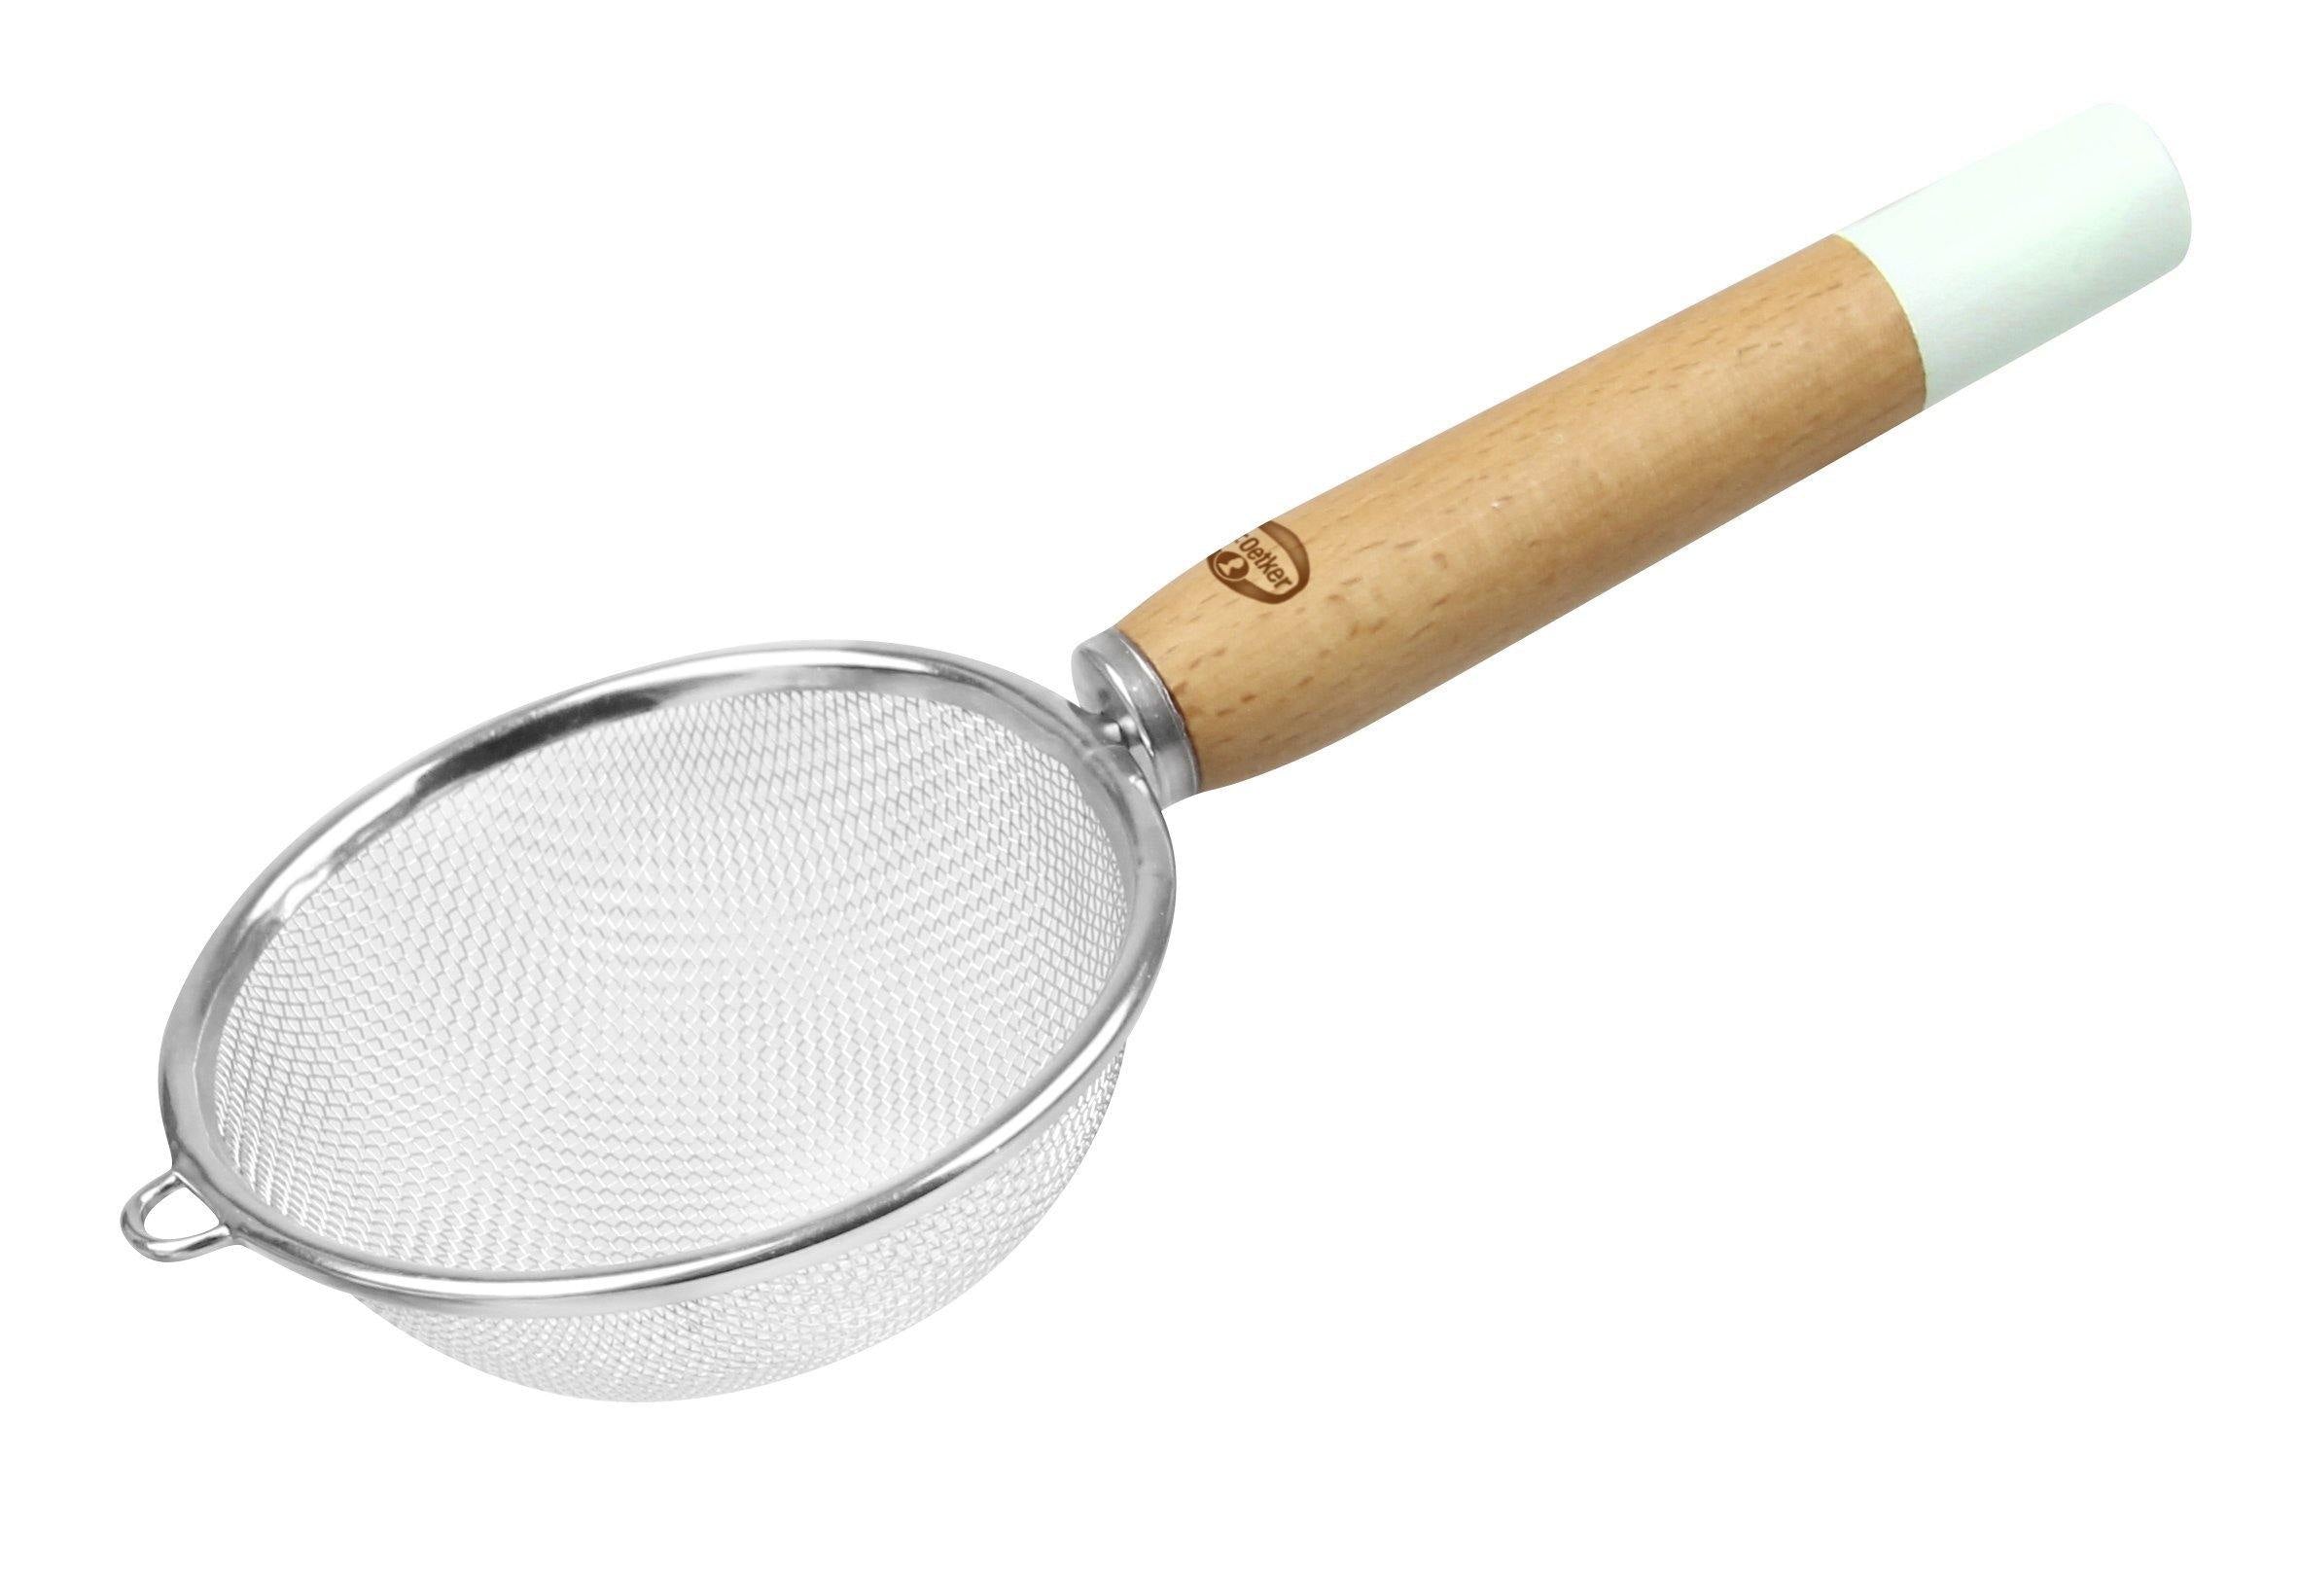 Dr. Oetker "Retro" Powder Sugar Sieve With Wooden Handle, Light Green/Brown/Silver, 10X22.5 Cm - Whole and All